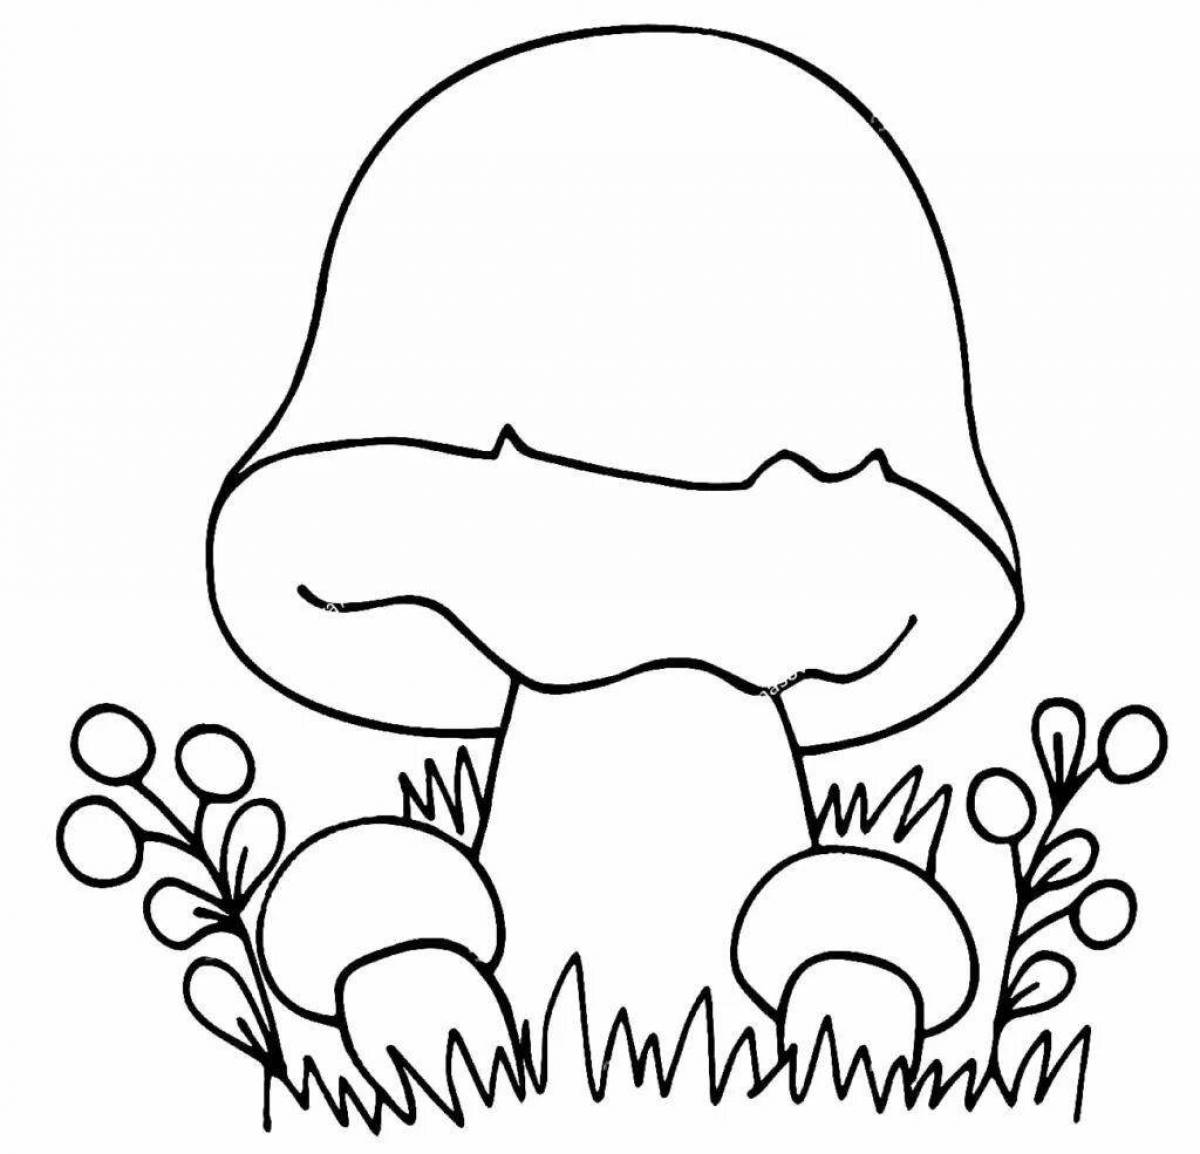 Colorful mushroom coloring page for 6-7 year olds